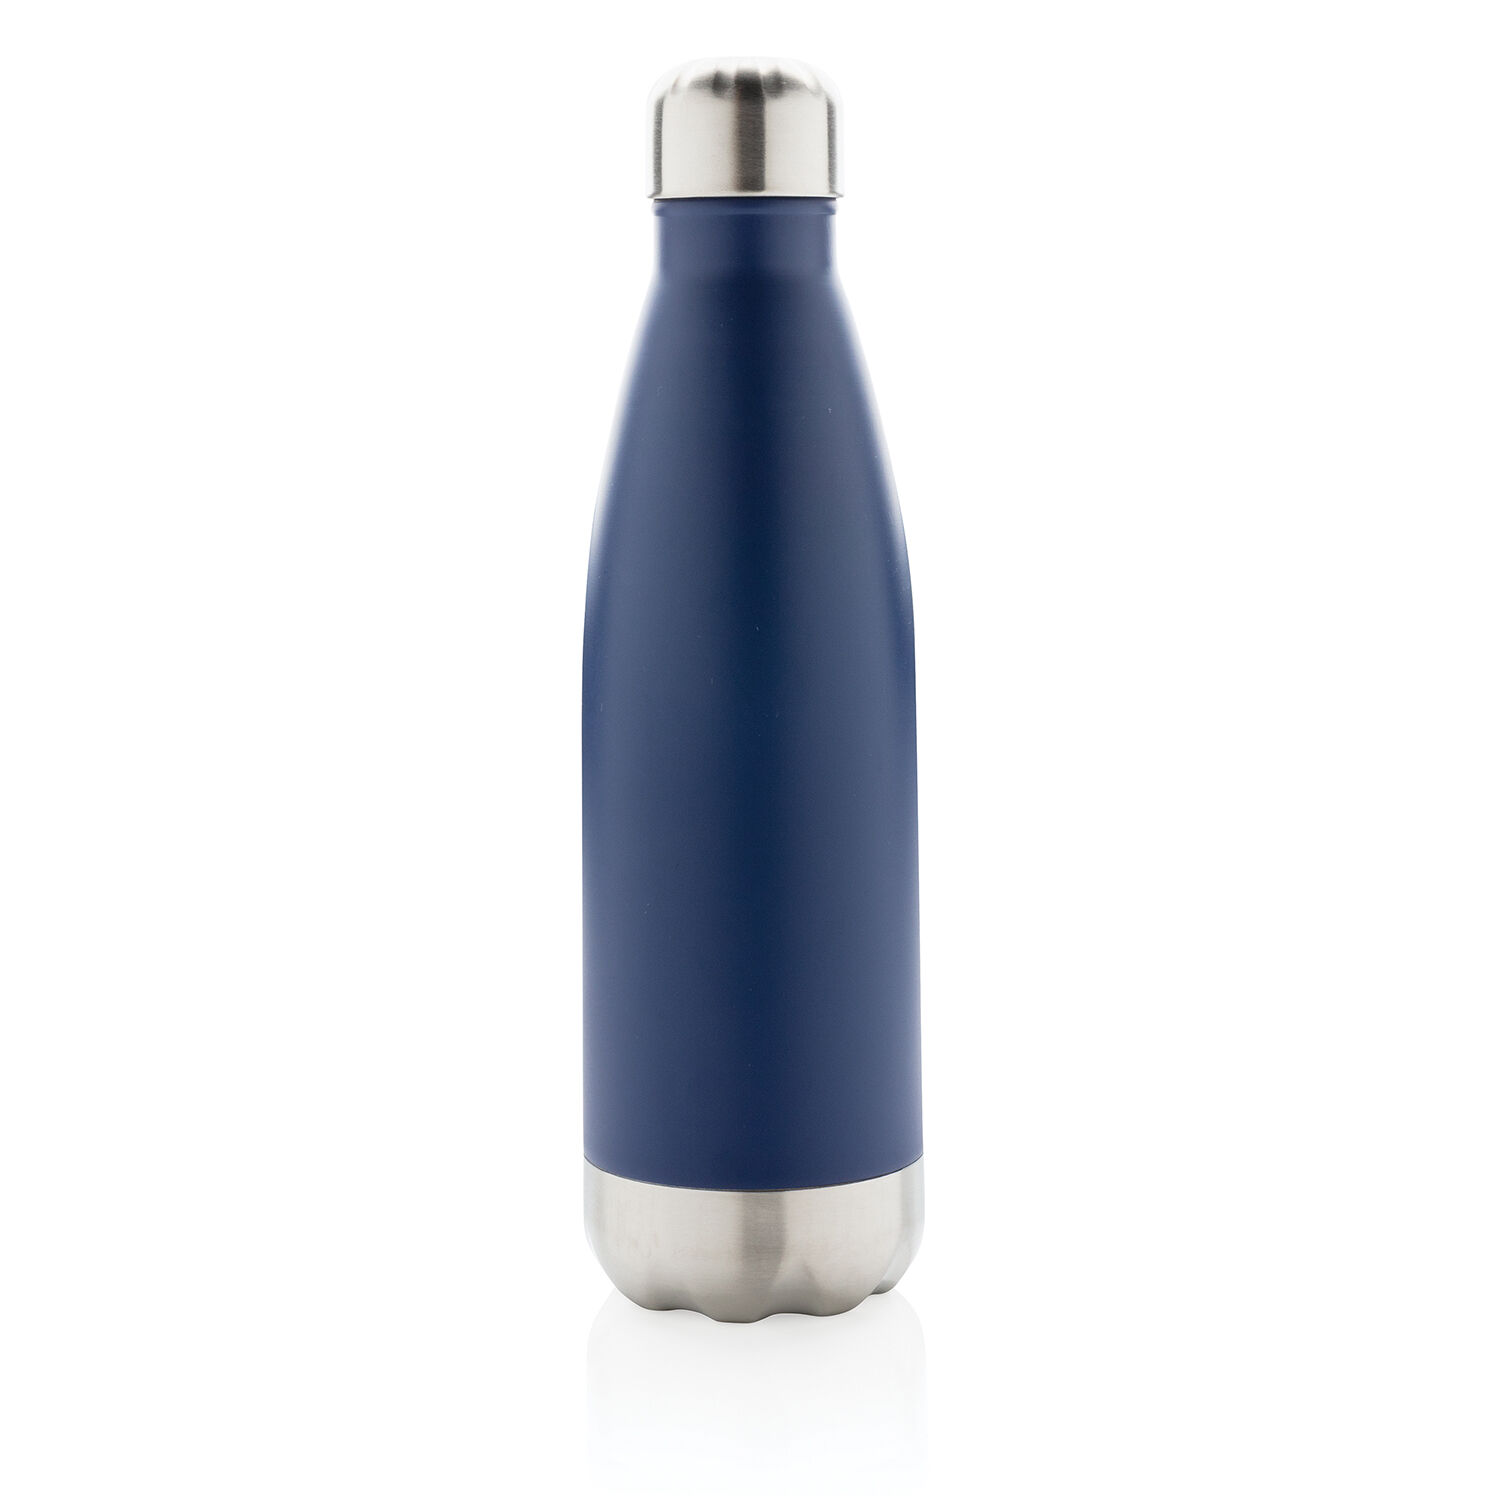 Insulated Water Bottles Pantone Matched